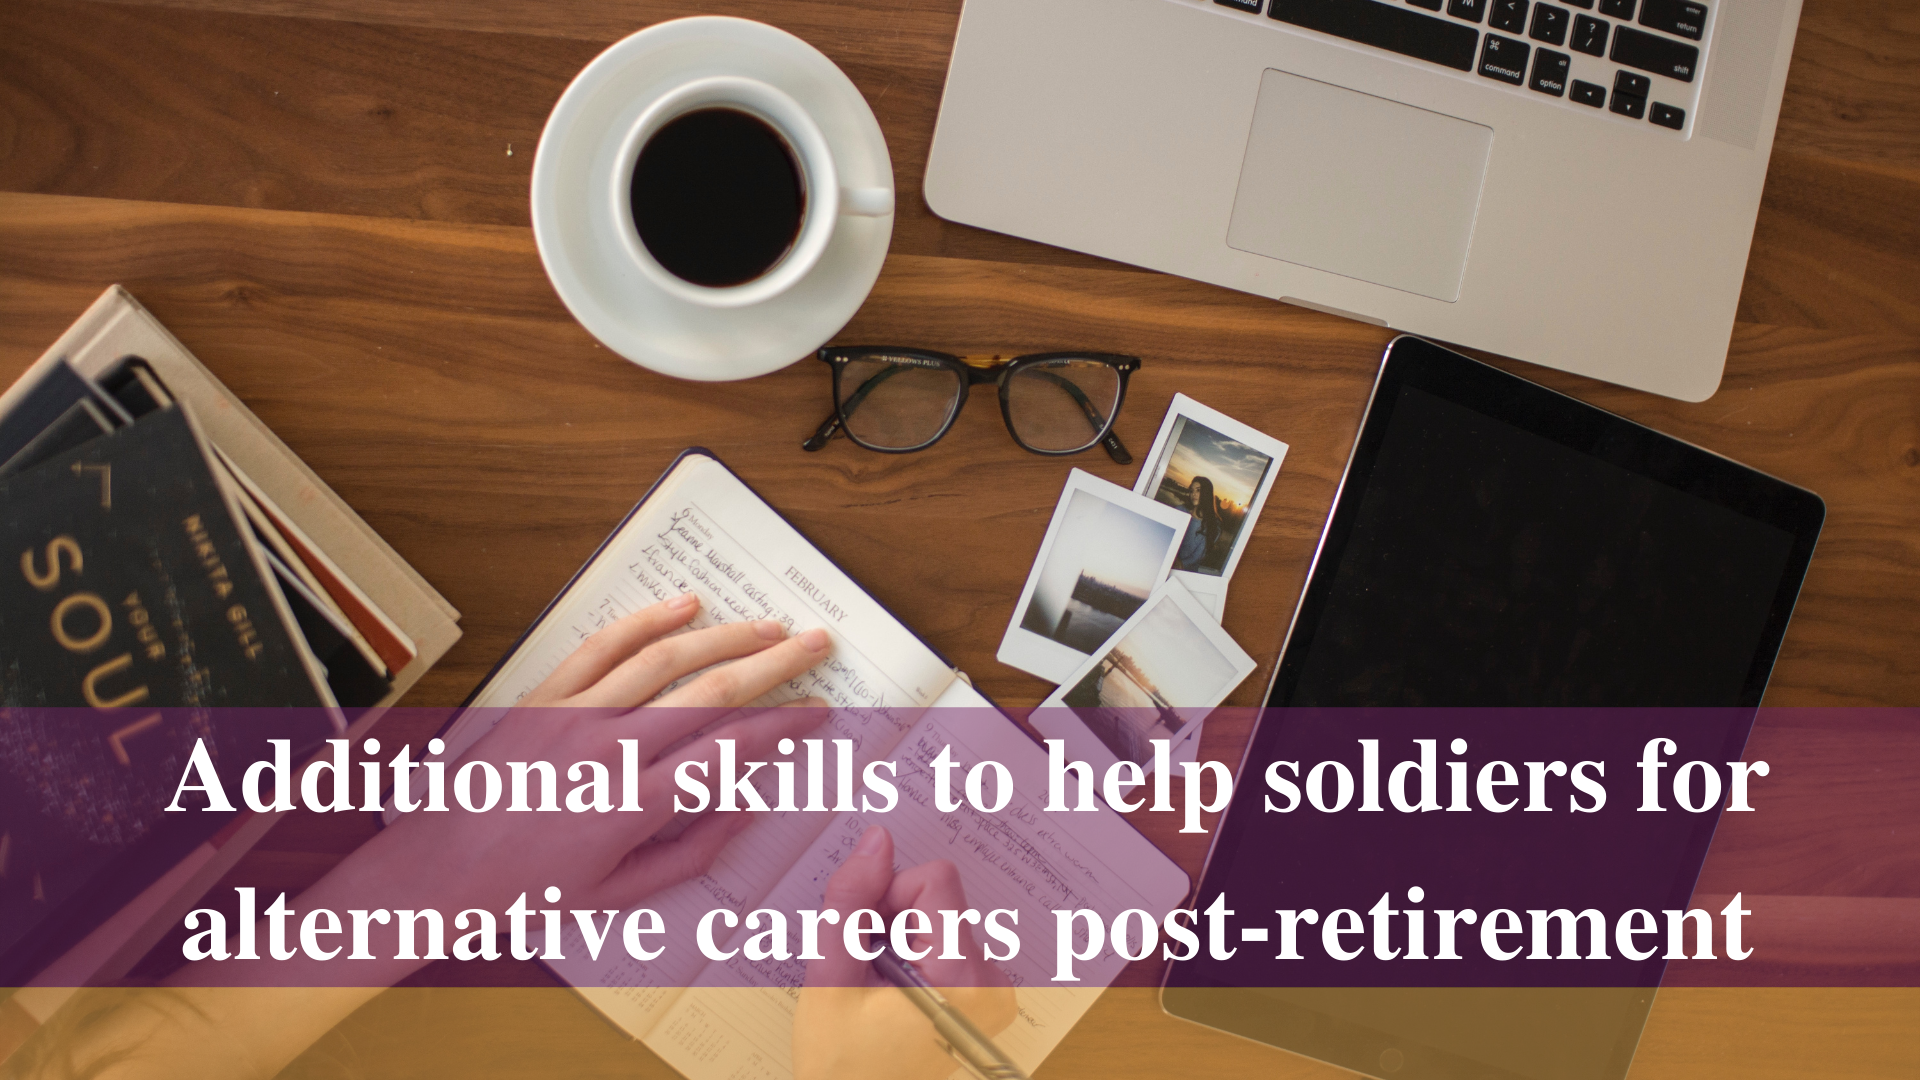 Additional skills to help soldiers for alternative careers post-retirement